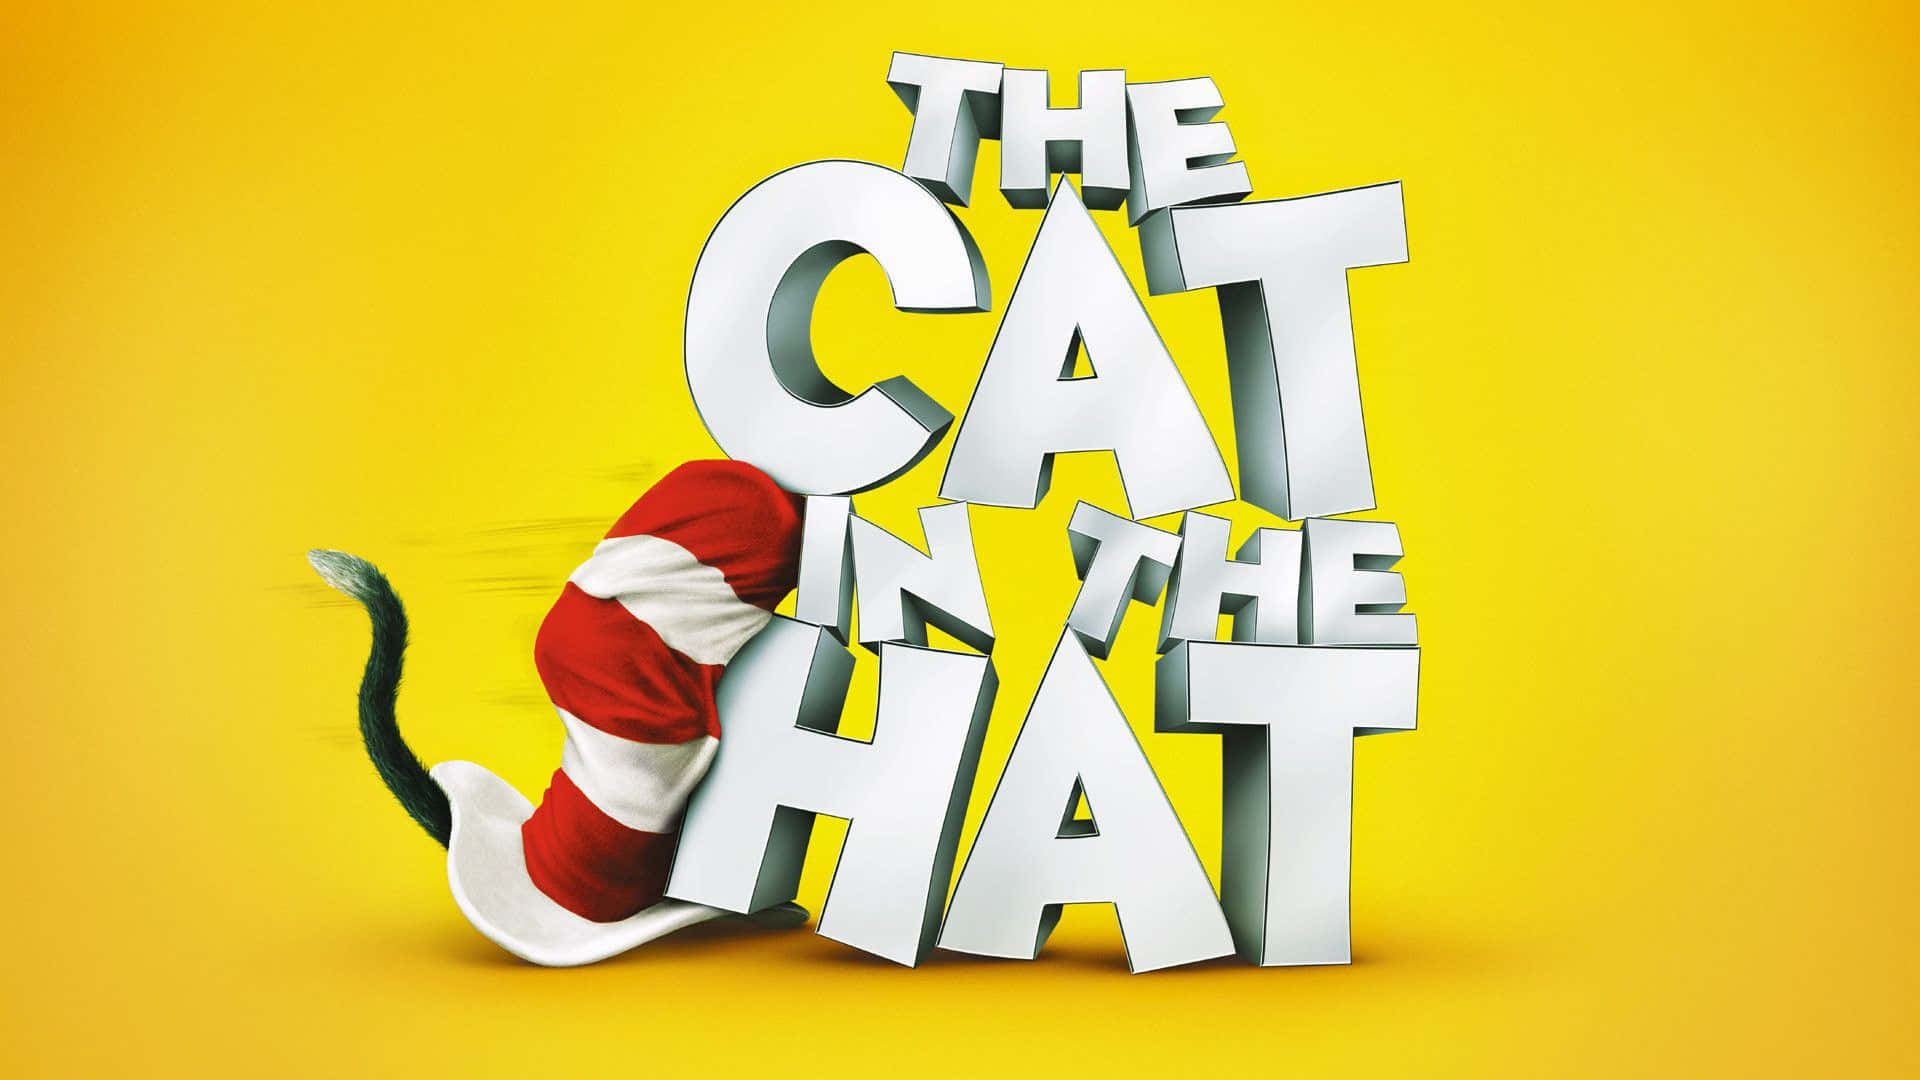 The Cat In The Hat Logo